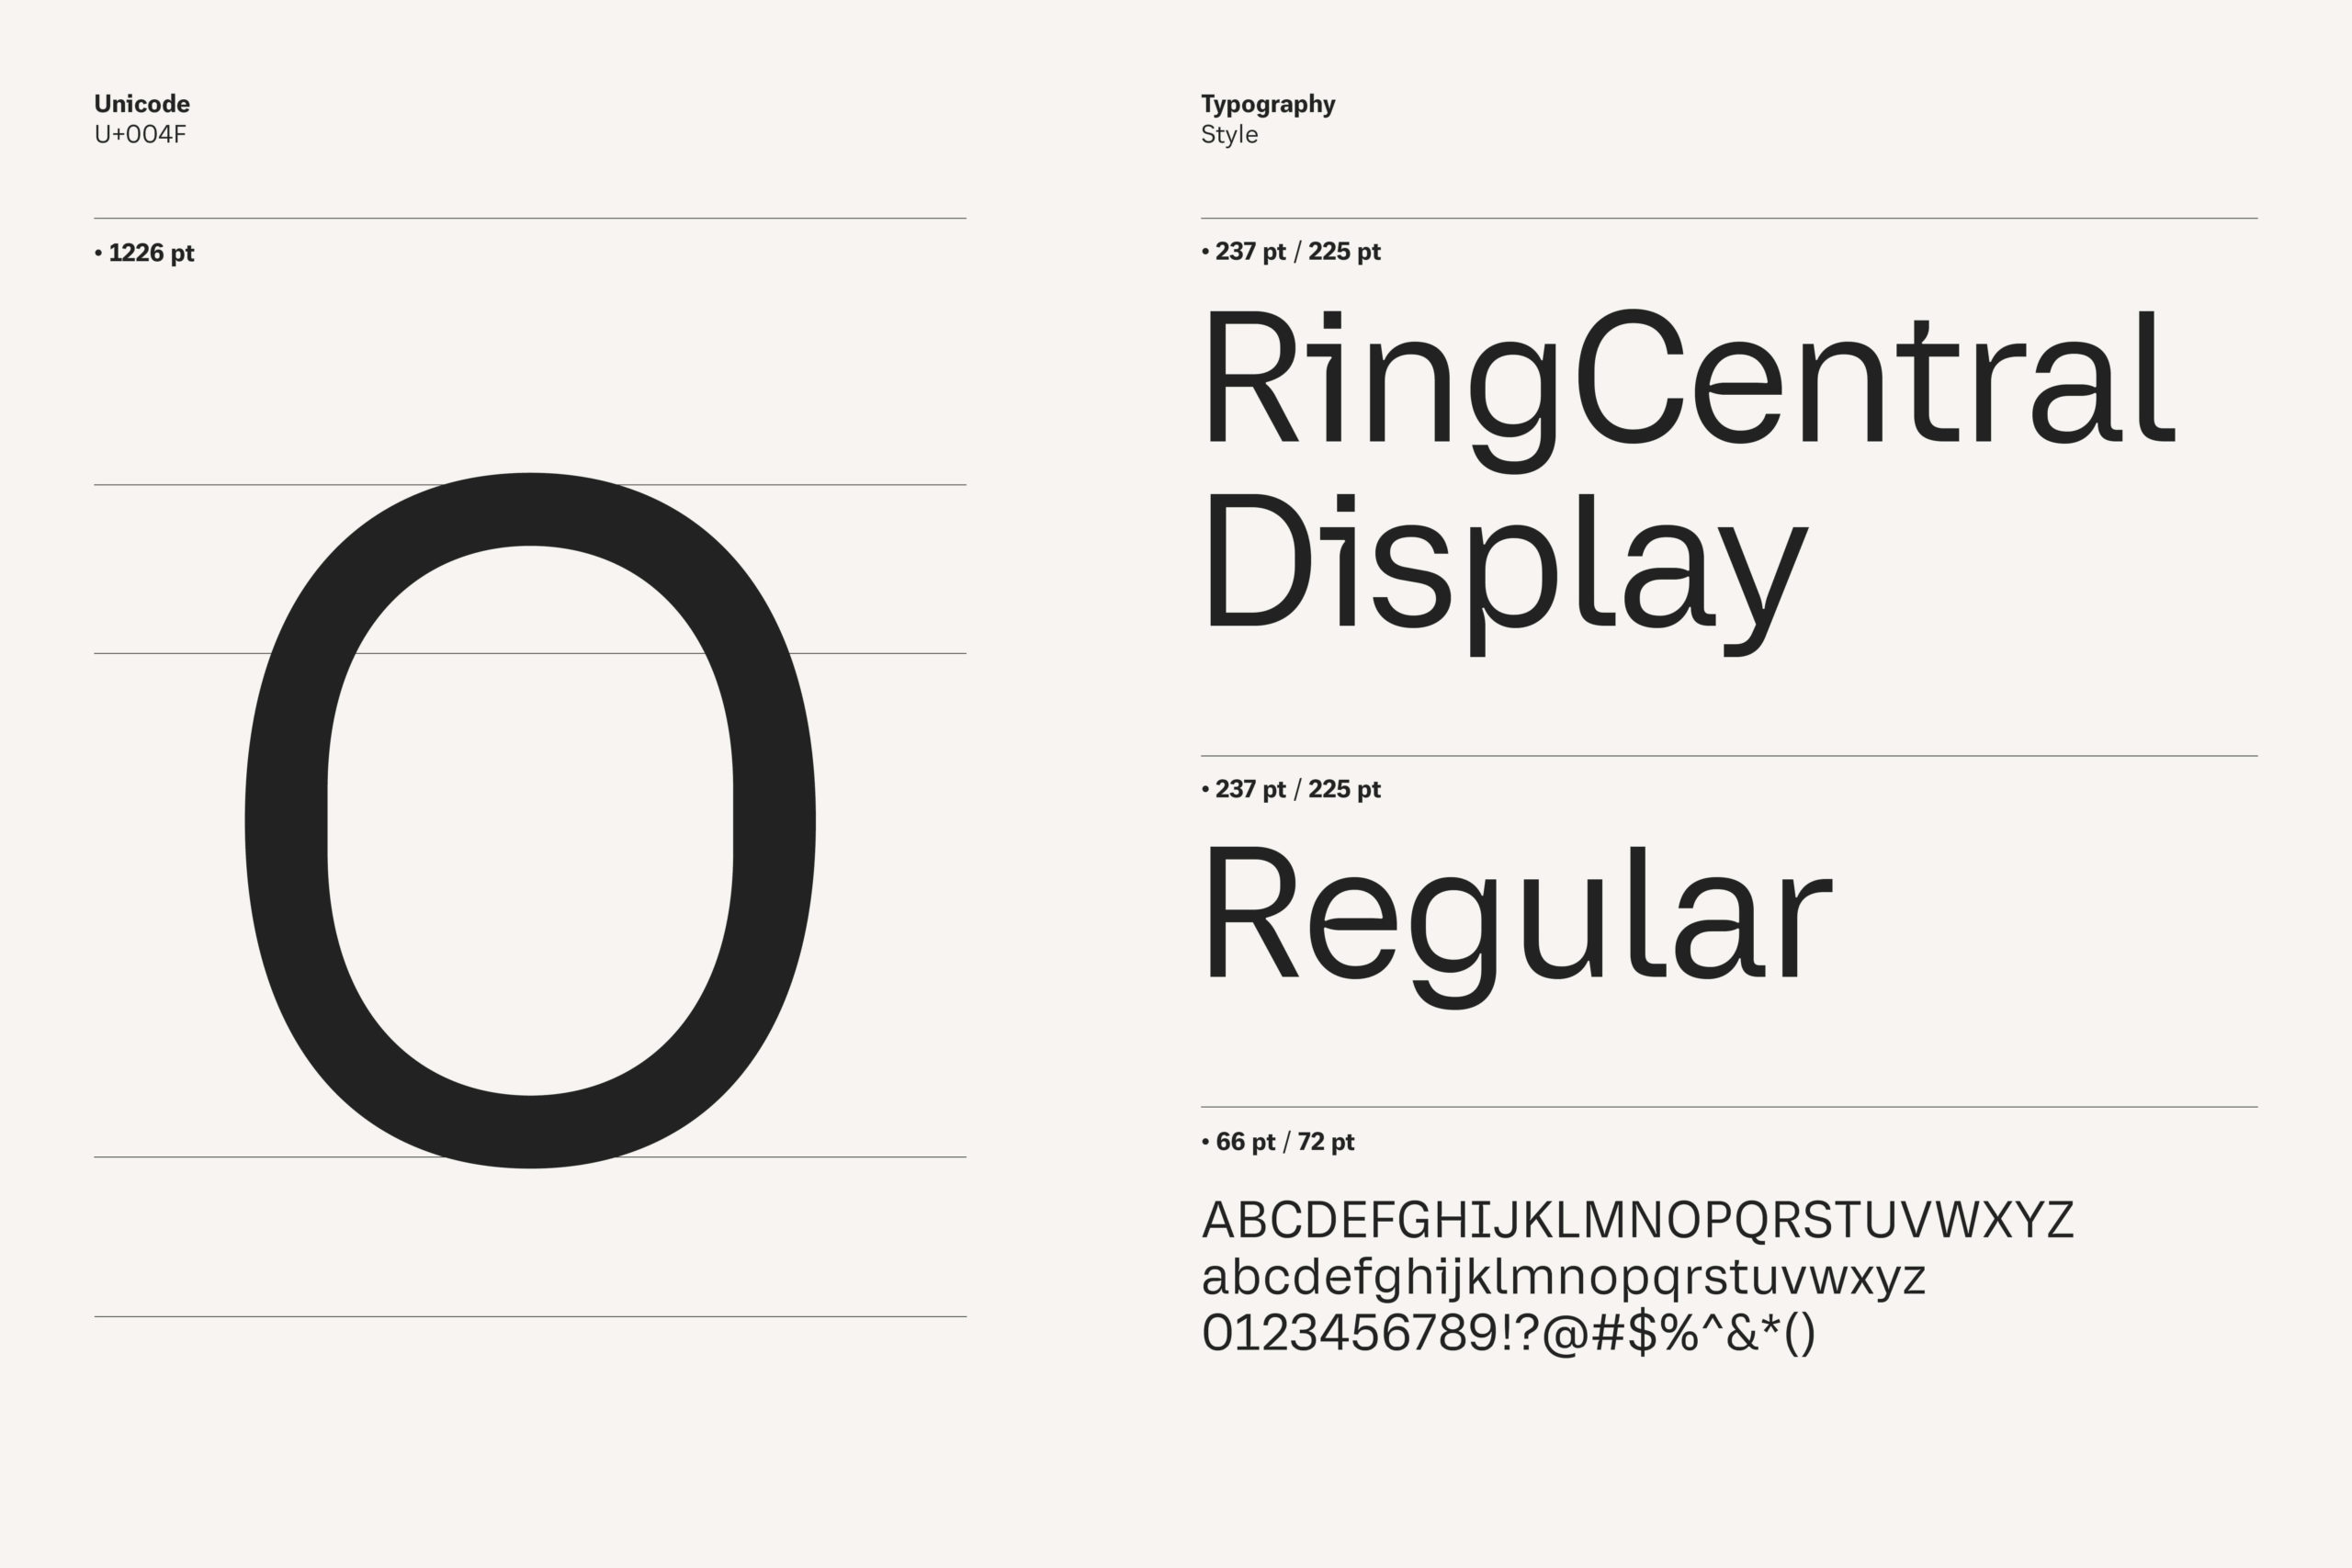 RingCentral Display_Typeface_0914225